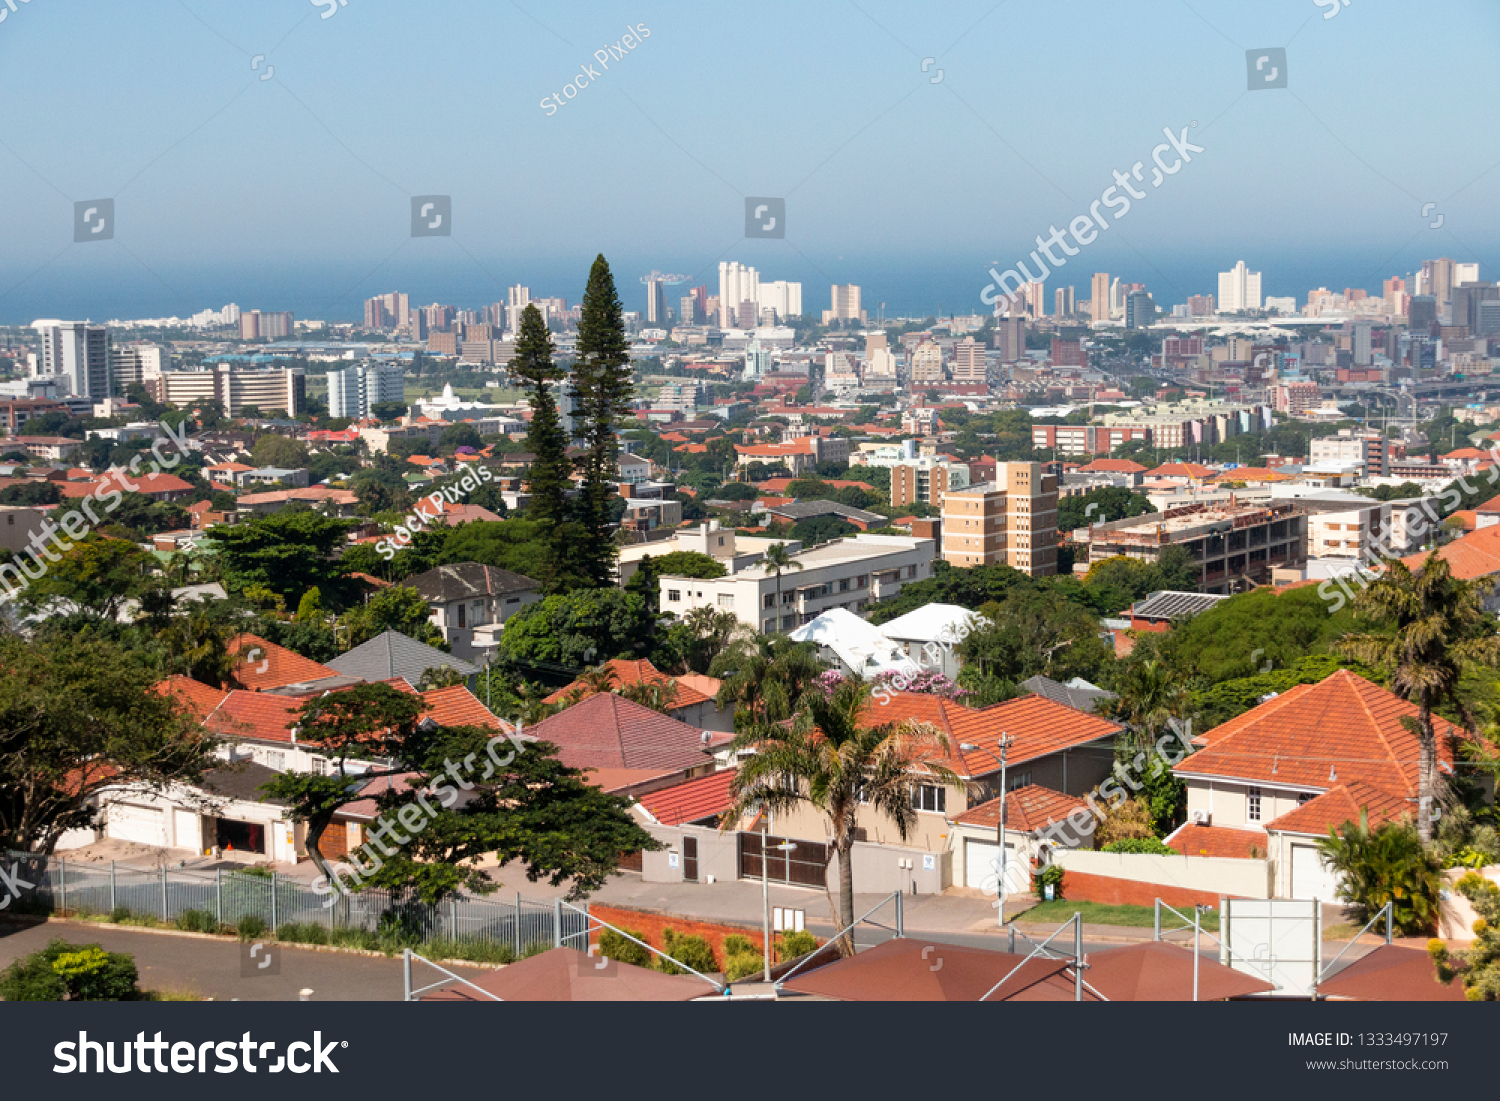 A view of the berea-westridge in Durban in kwa-zulu Natal south africa and the ocean in the distance for a fith floor building  #1333497197